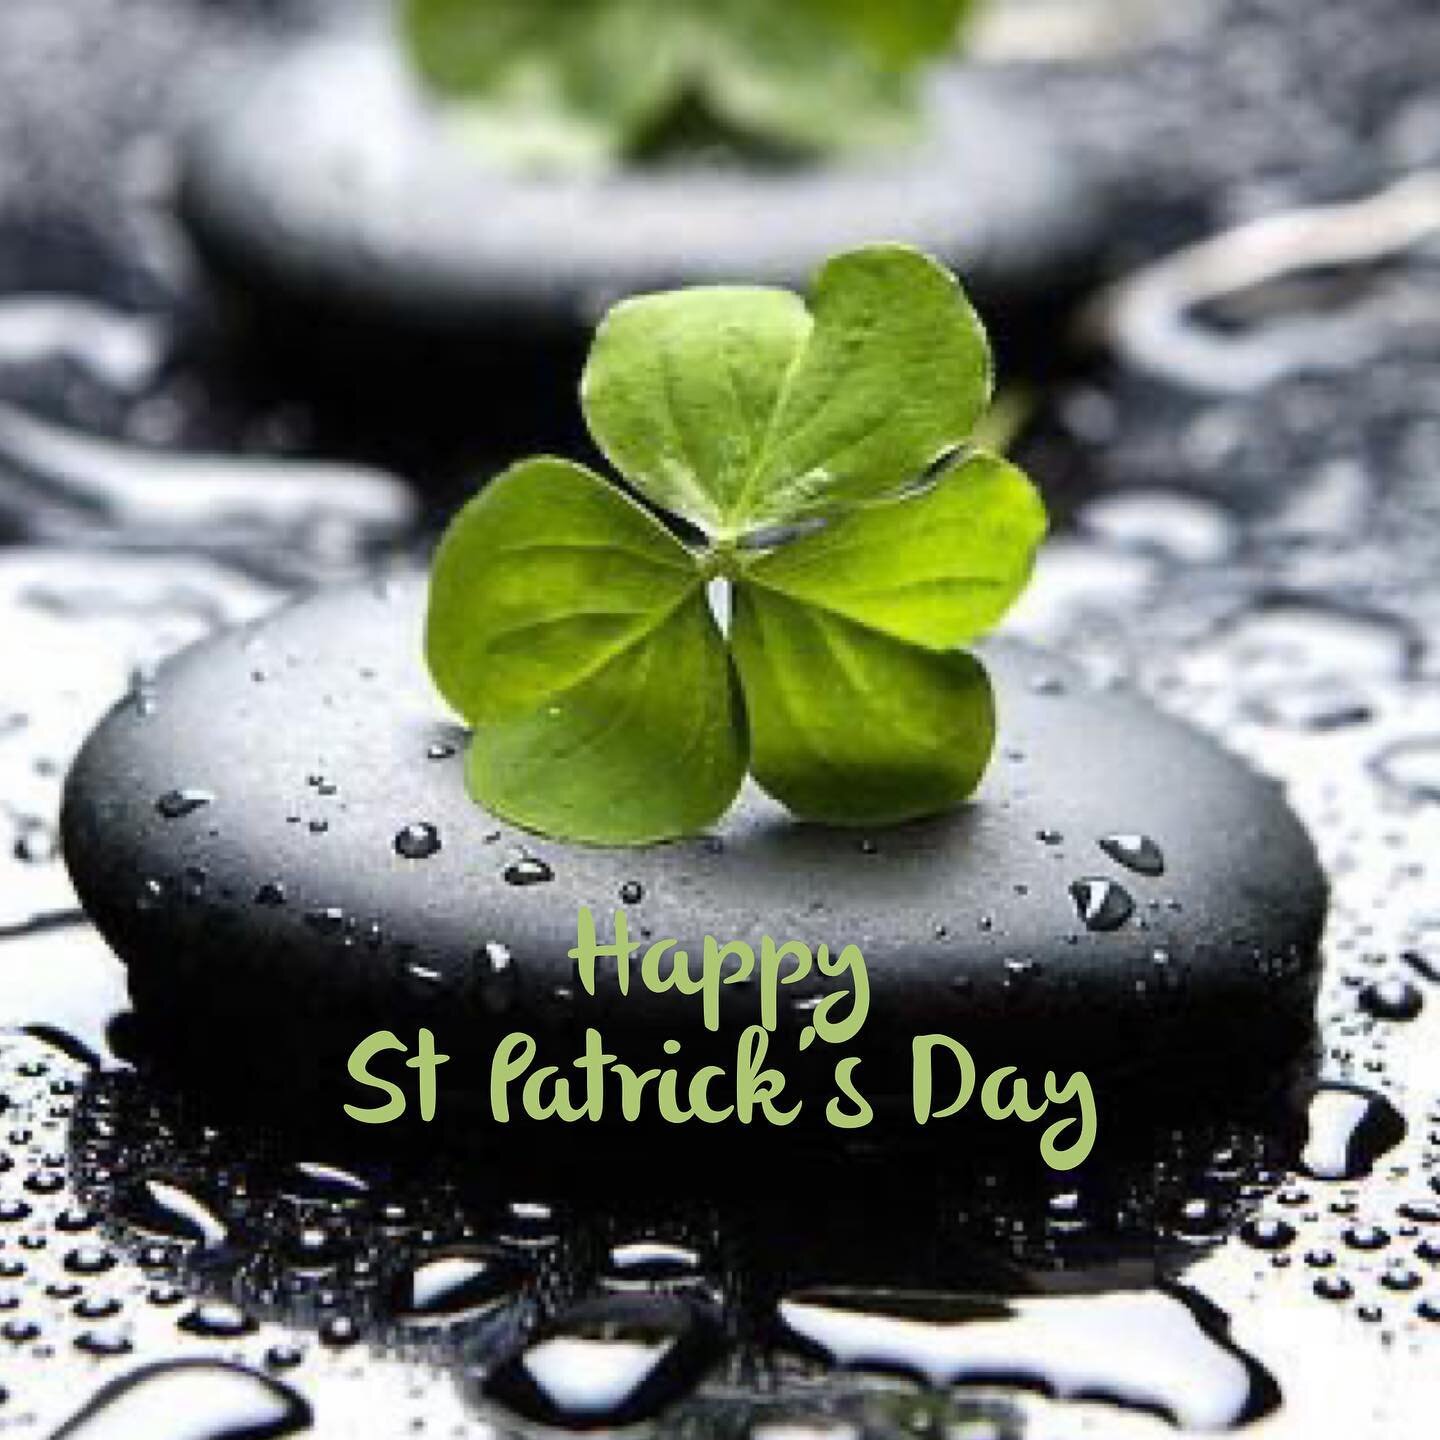 Luck be with you 

Happy St Patricks Day!! 

As they say, the harder you work, the luckier you get!